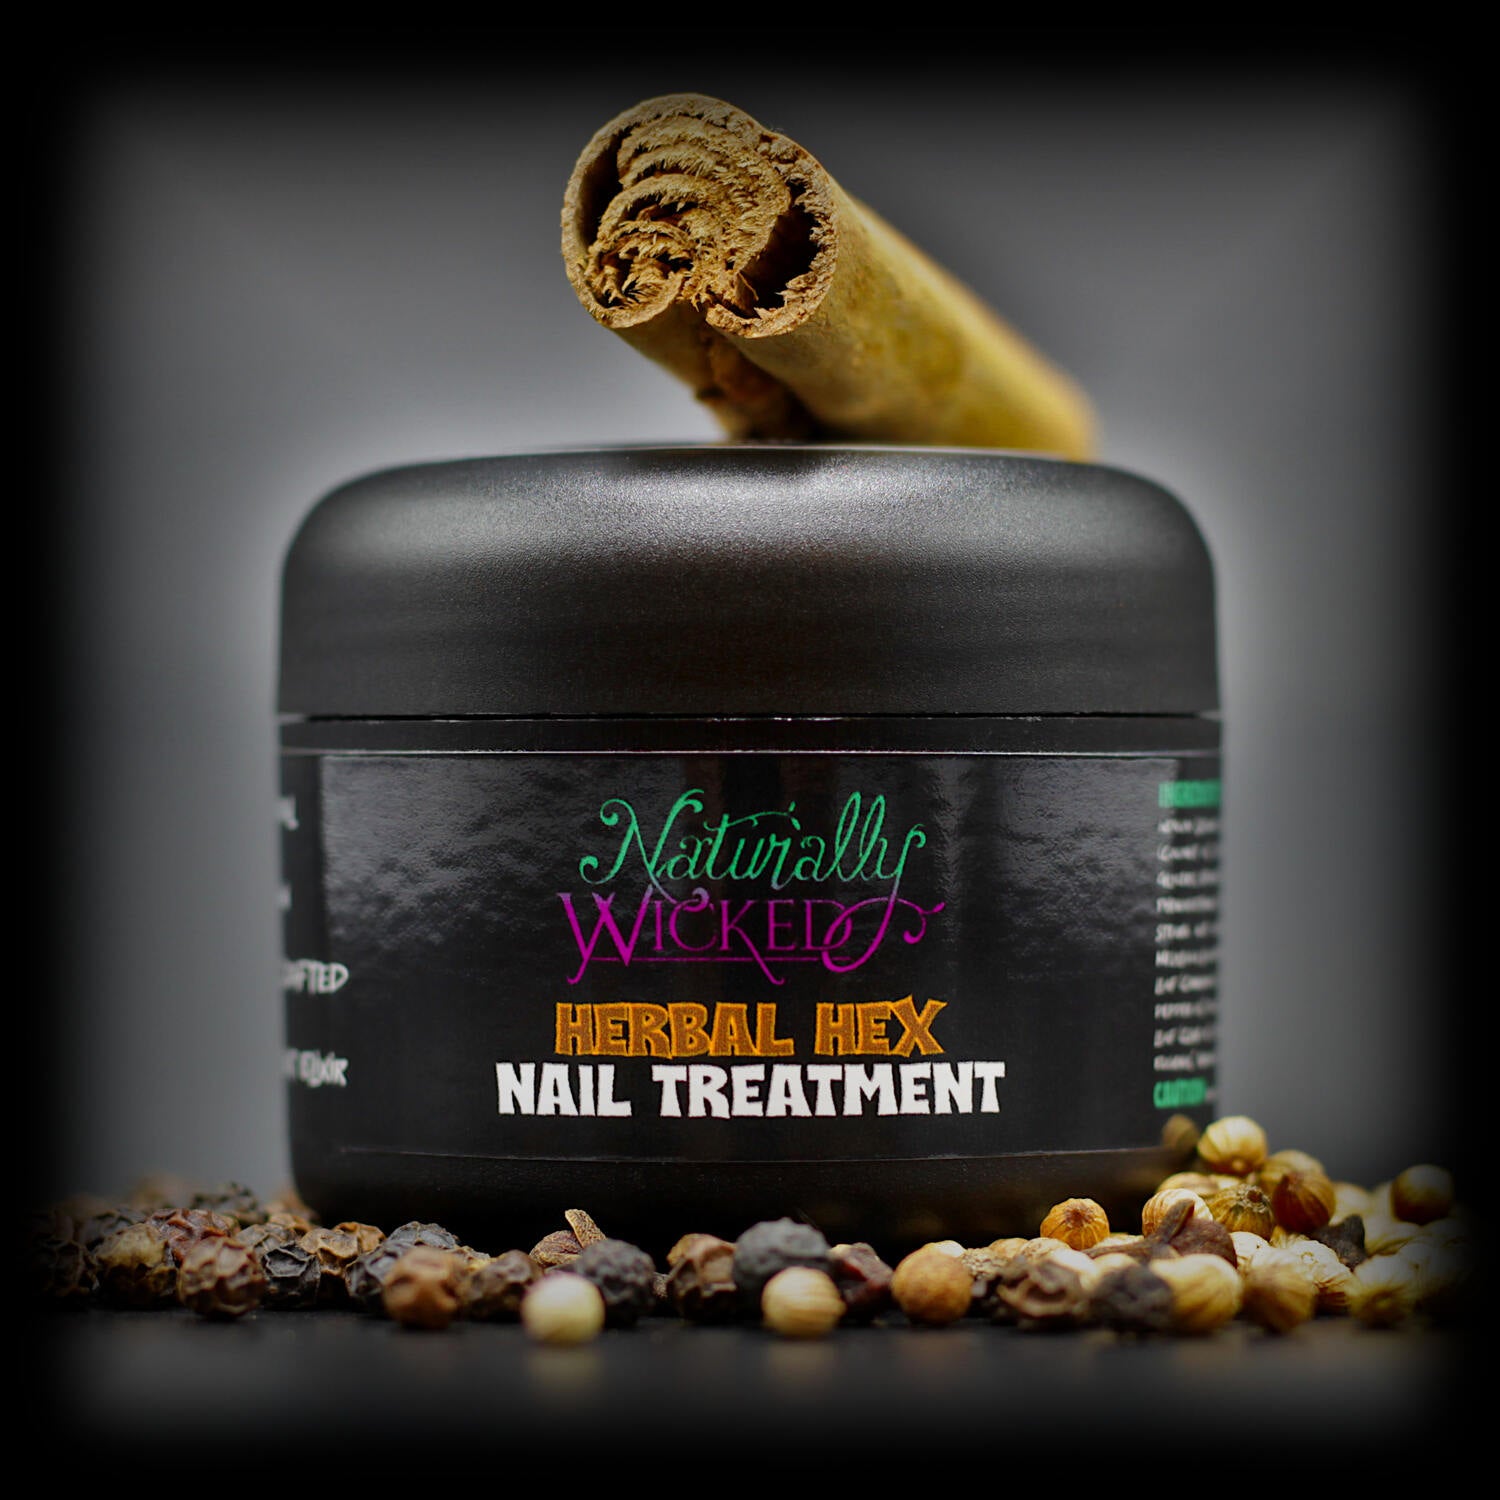 Naturally Wicked Herbal Hex Nail Treatment Surrounded By Nail Restoring Herbs; Cinnamon, Pepper, Clove & Coriander